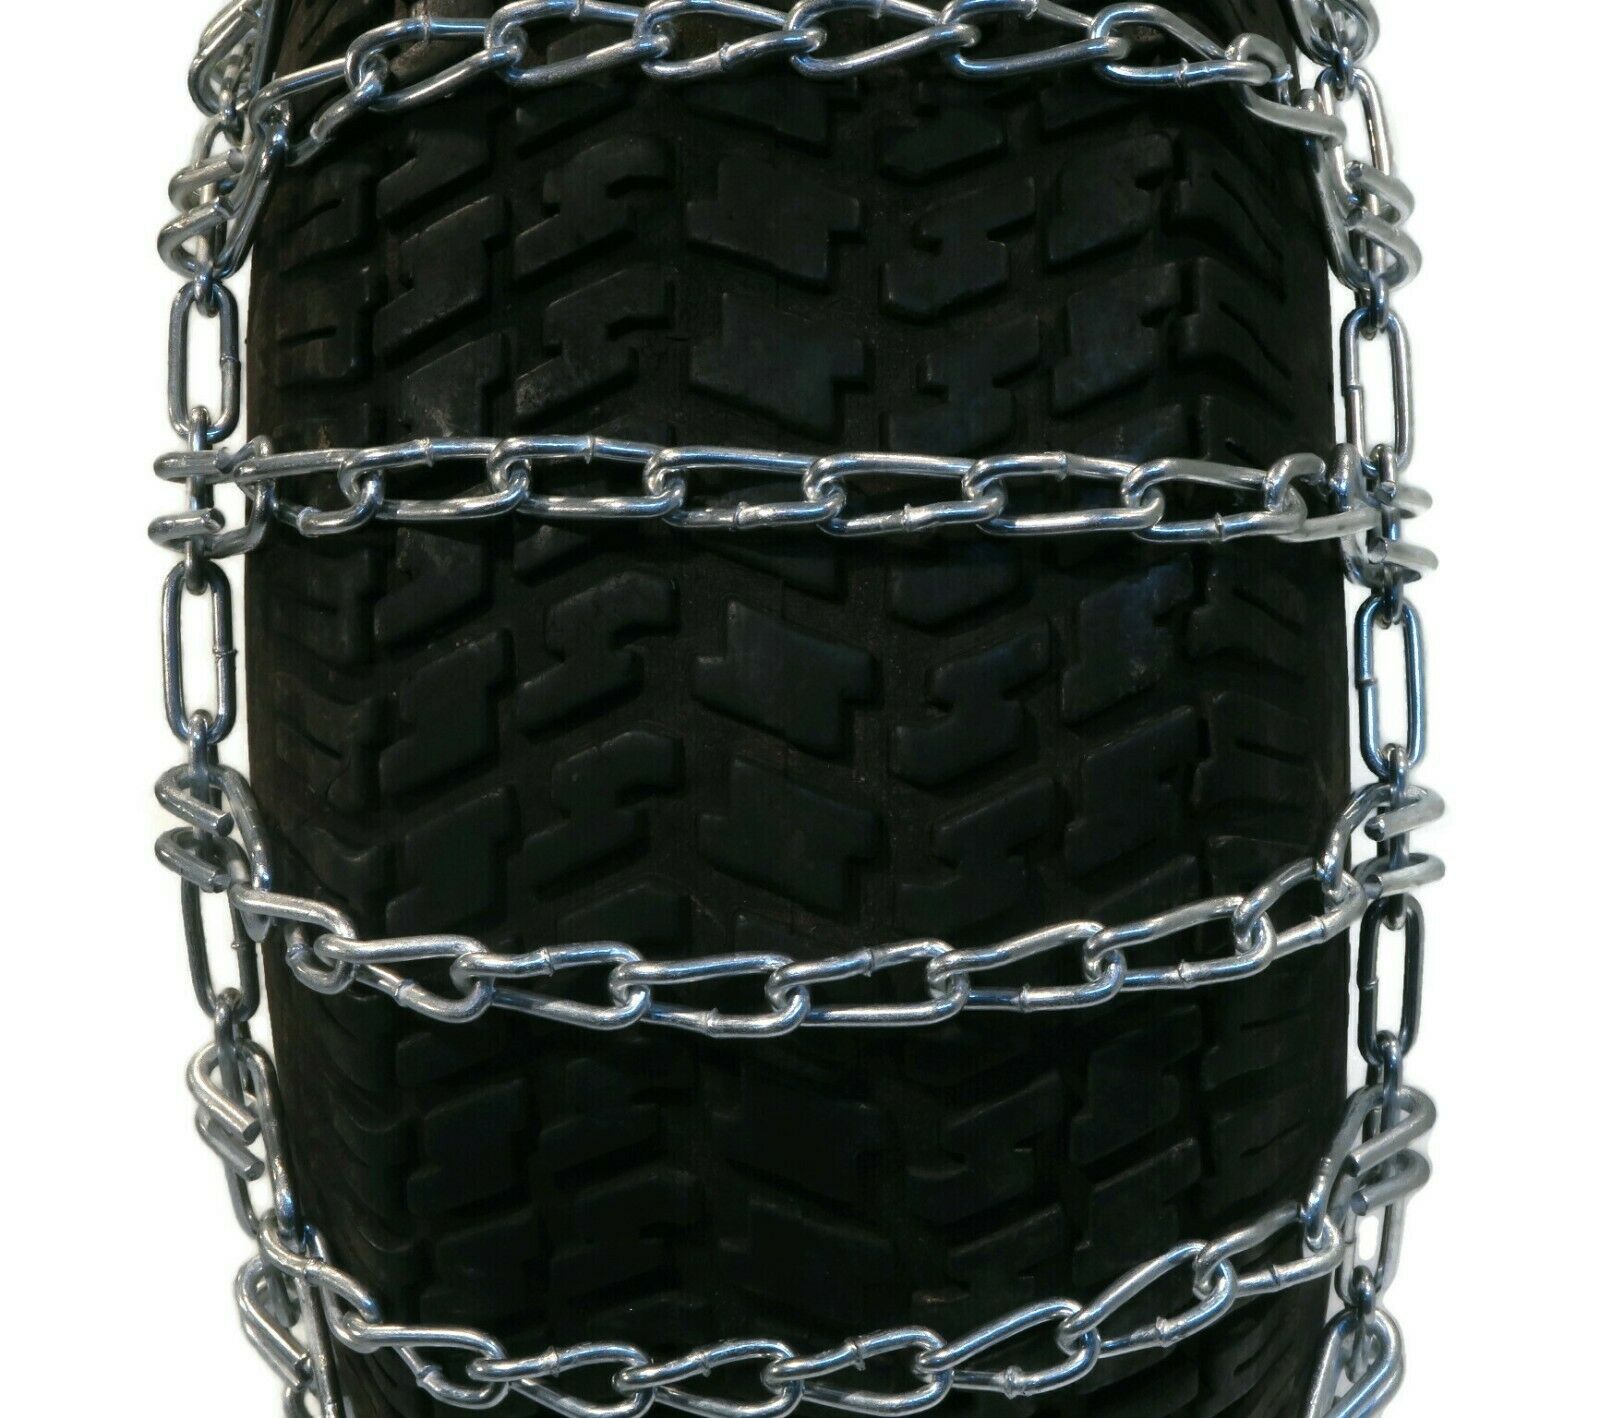 The ROP Shop | Pair 2 Link Tire Chains 15x6.00x6 For Toro Wheel Horse Lawn Mower Tractor Rider - image 4 of 6